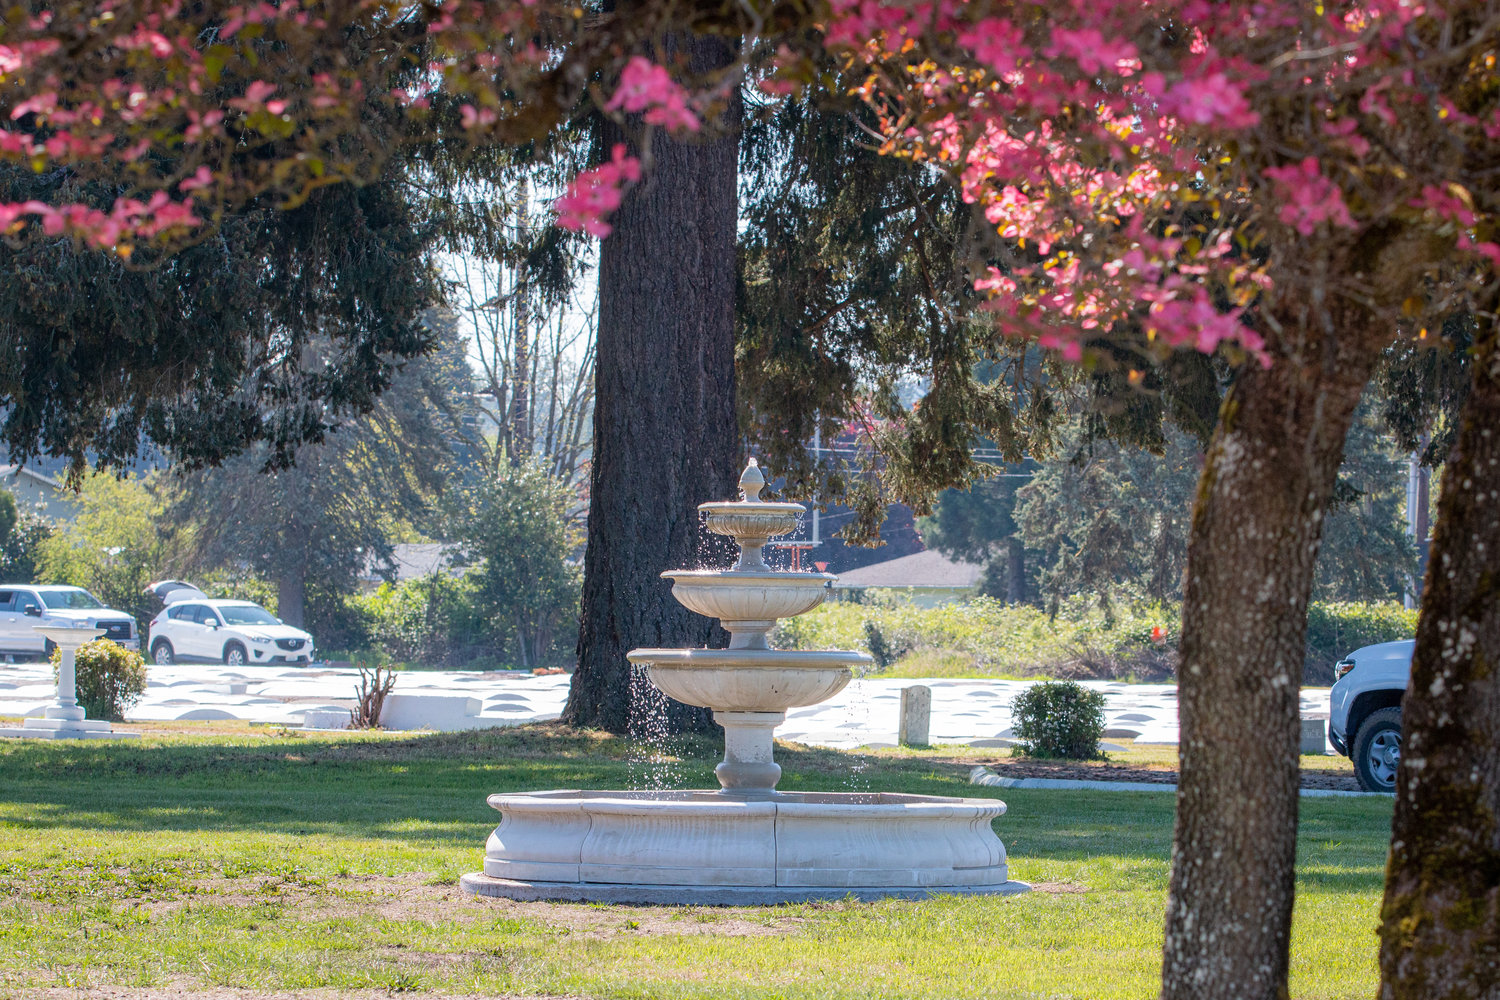 A new fountain sits in the morning sunlight at the center of the Centralia Greenwood Memorial Park.